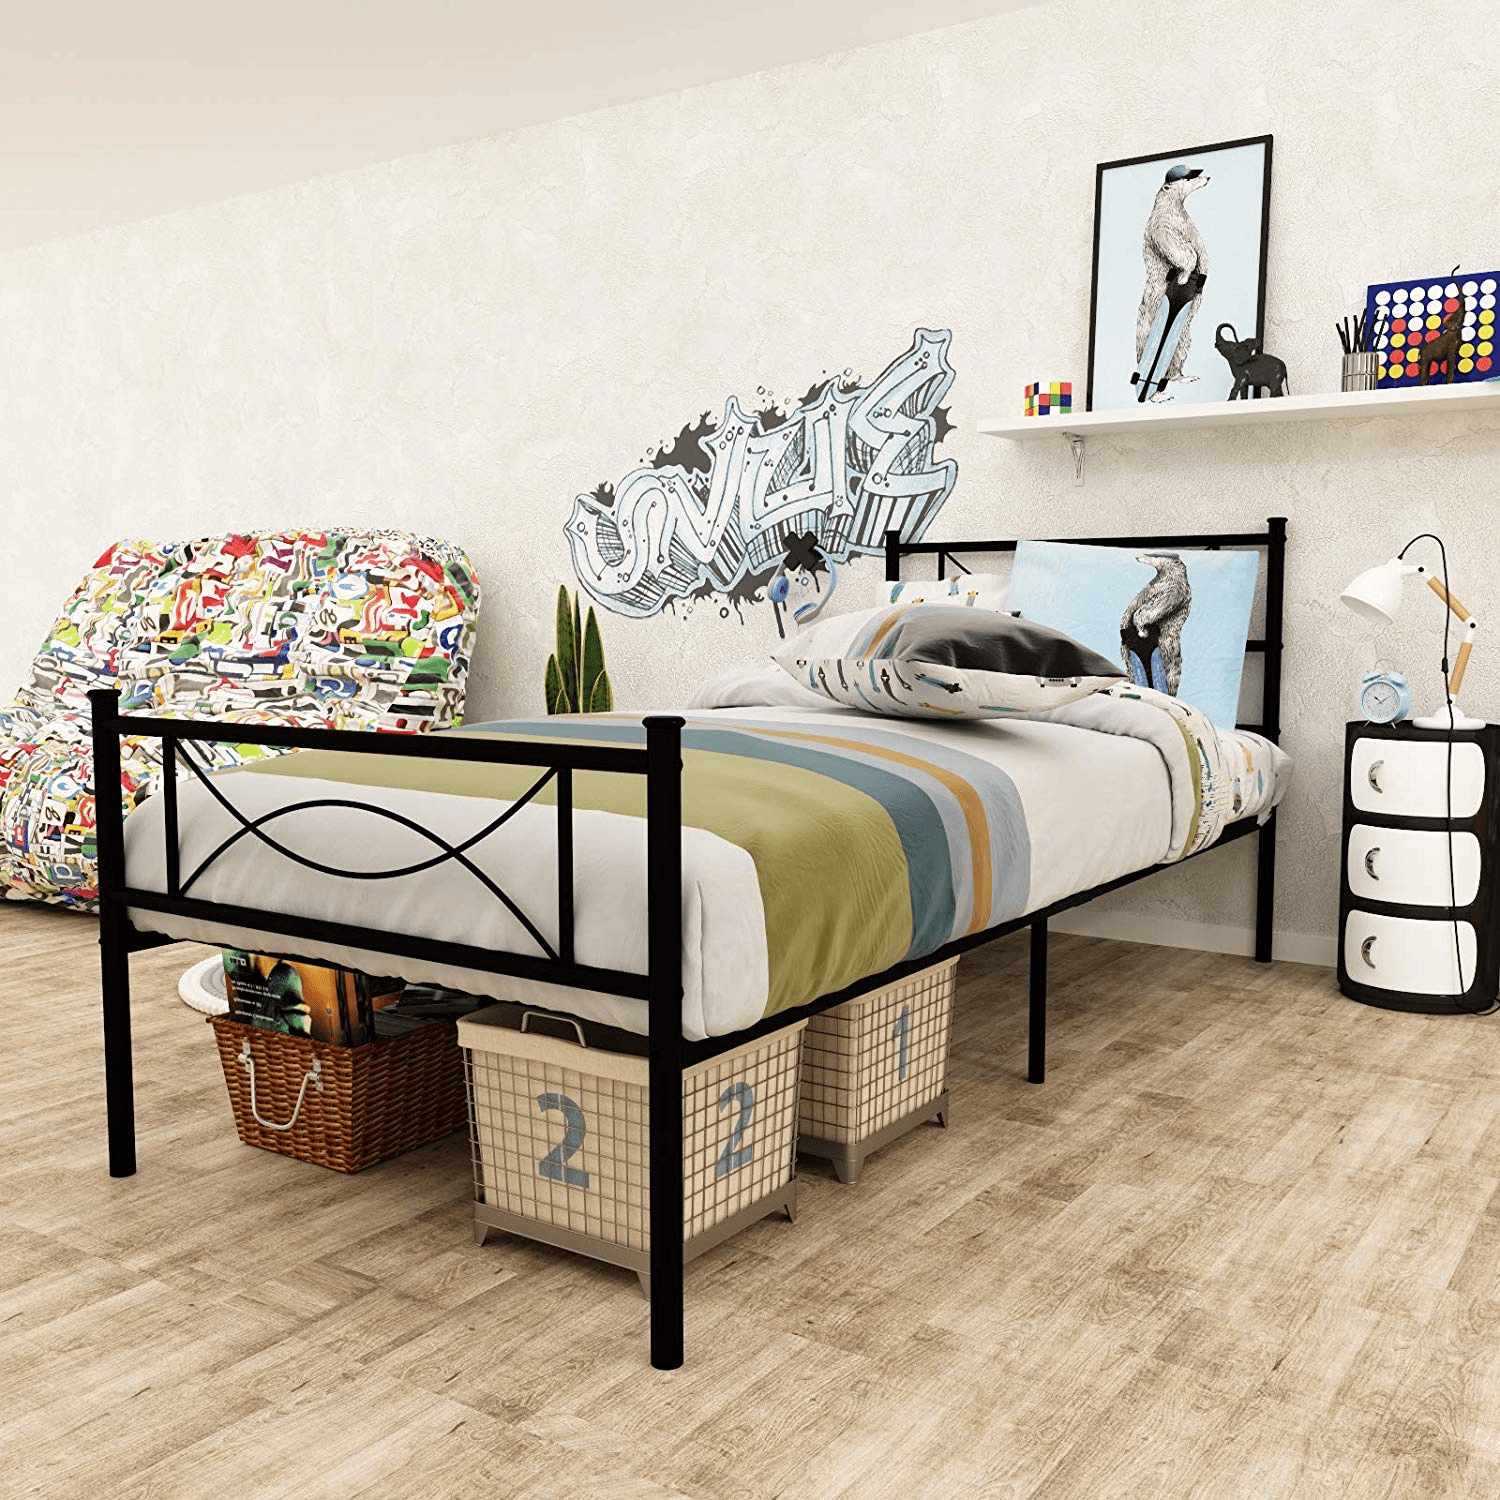 Yoneston Twin Size Metal Platform Bed with Bowknot Headboards Easy Assembly (Mattress Not Included)